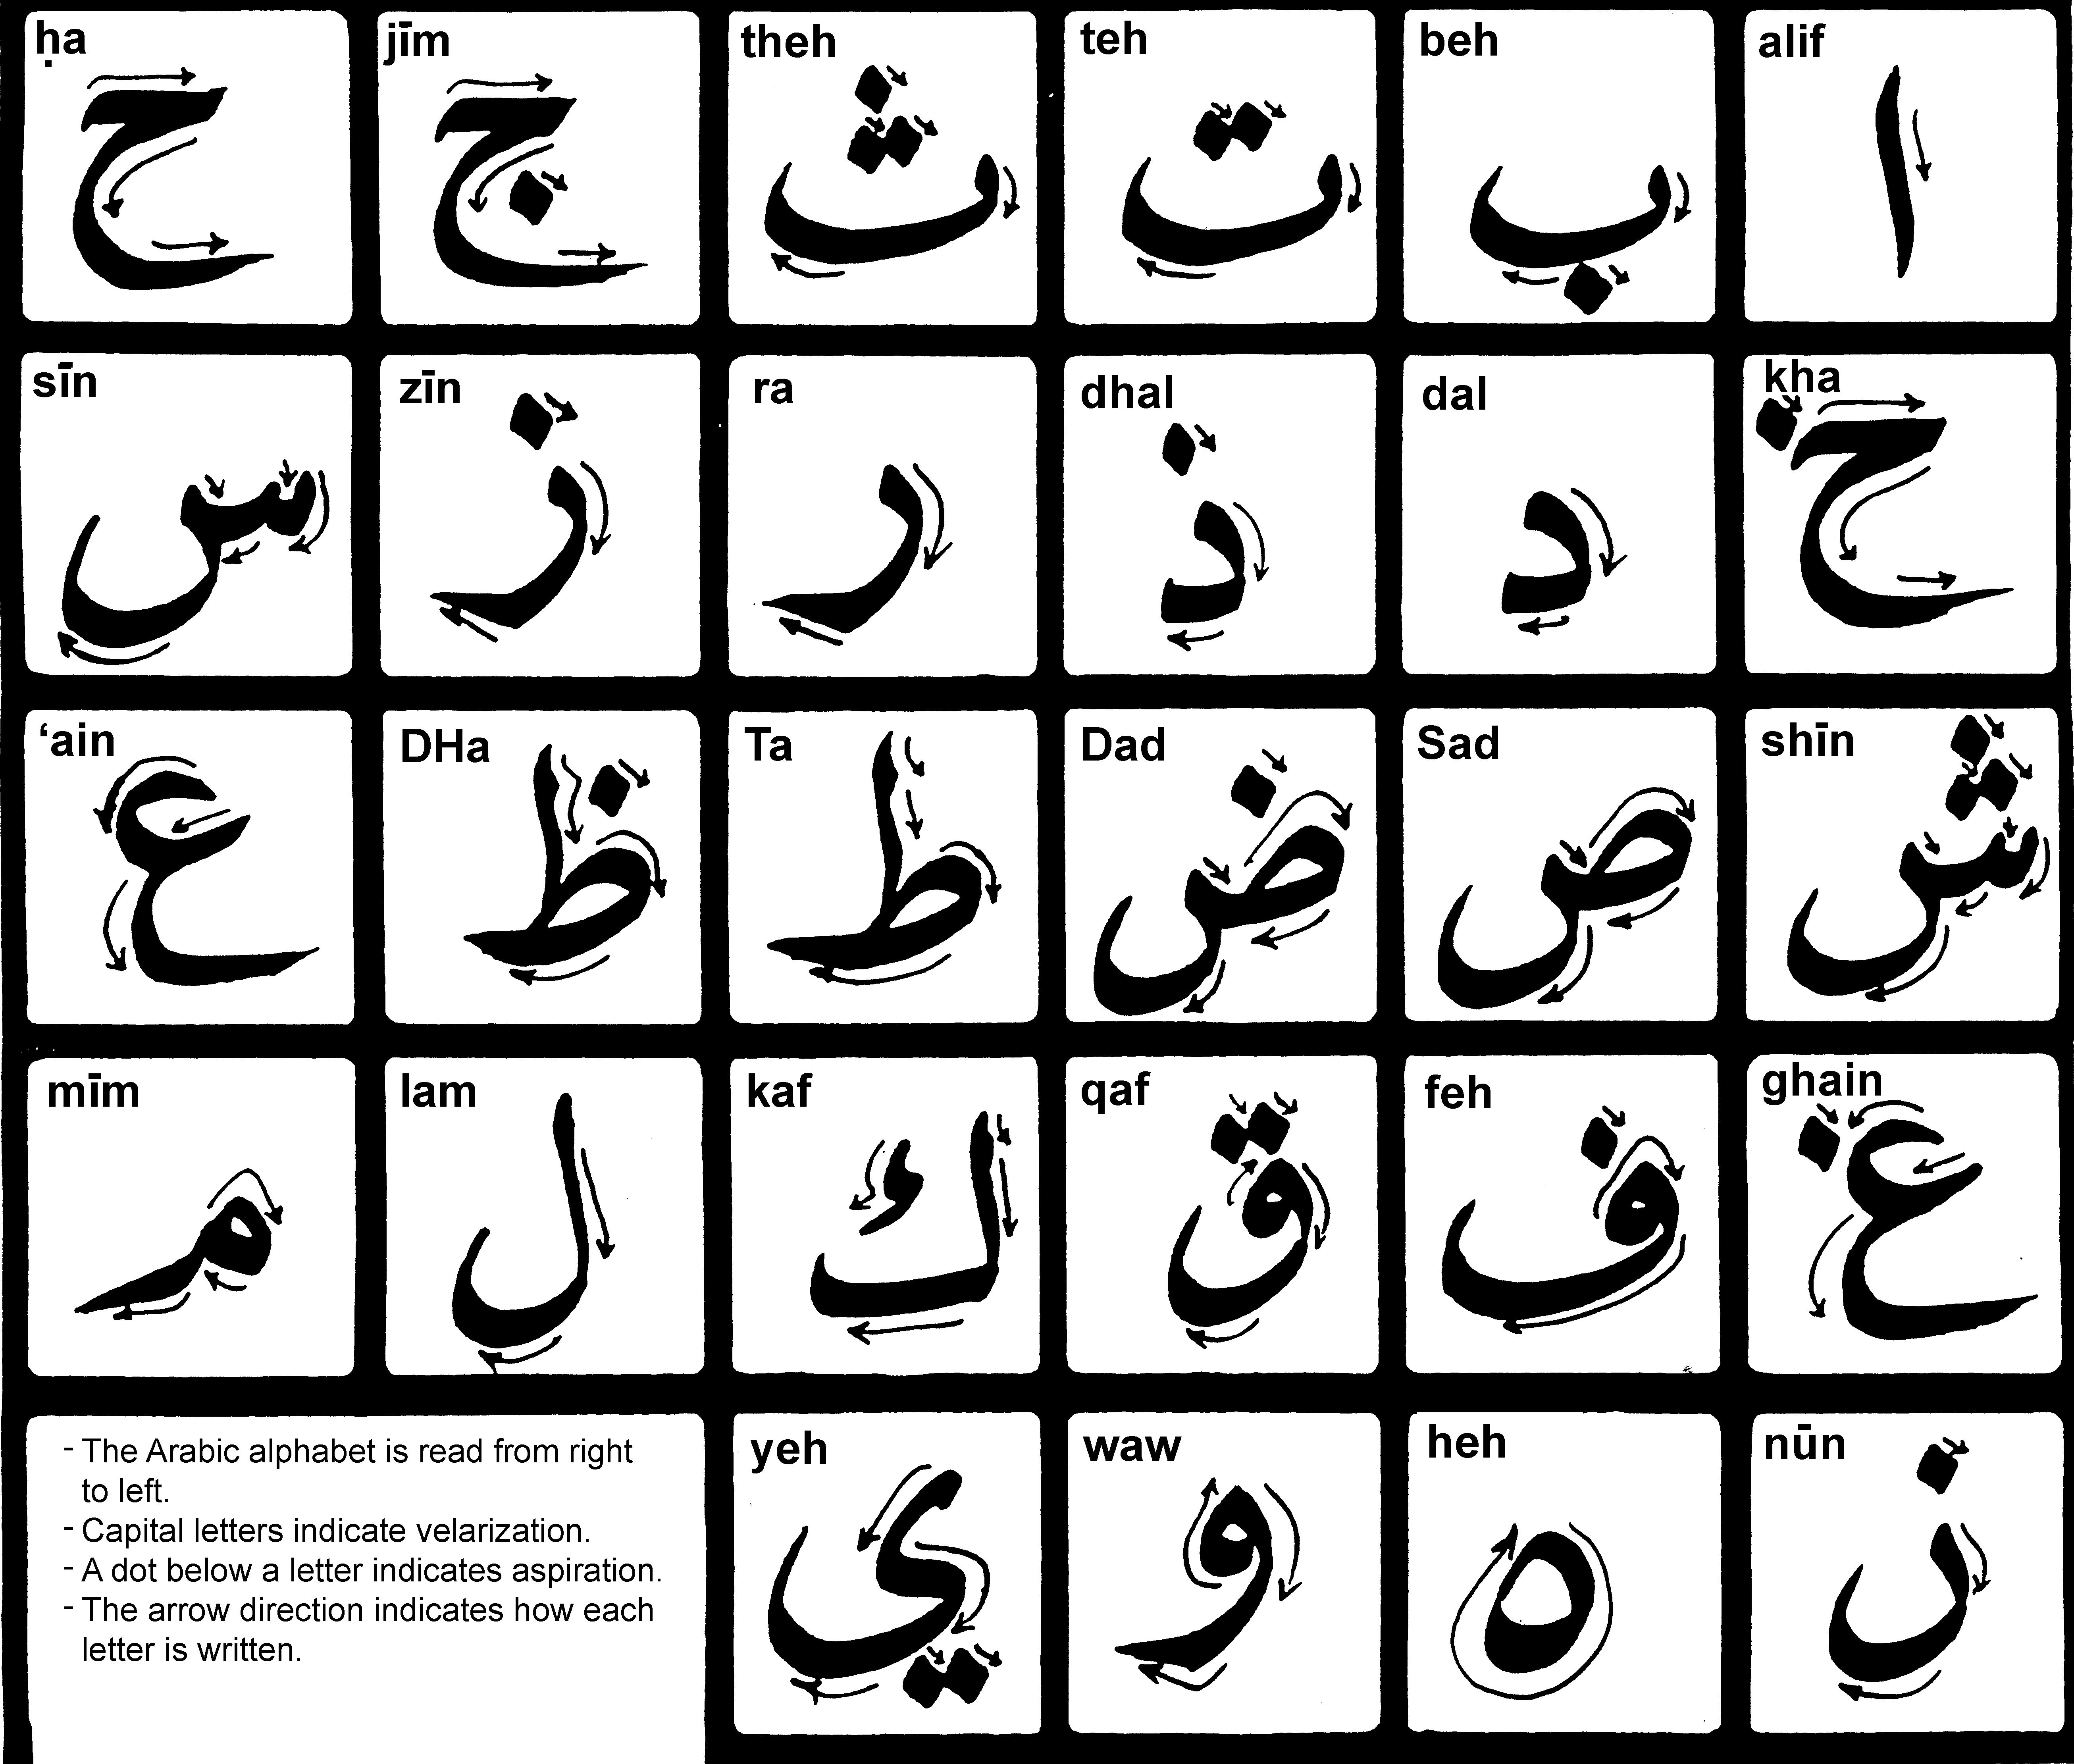 All about learning the Arabic Alphabet online | Fifty ...